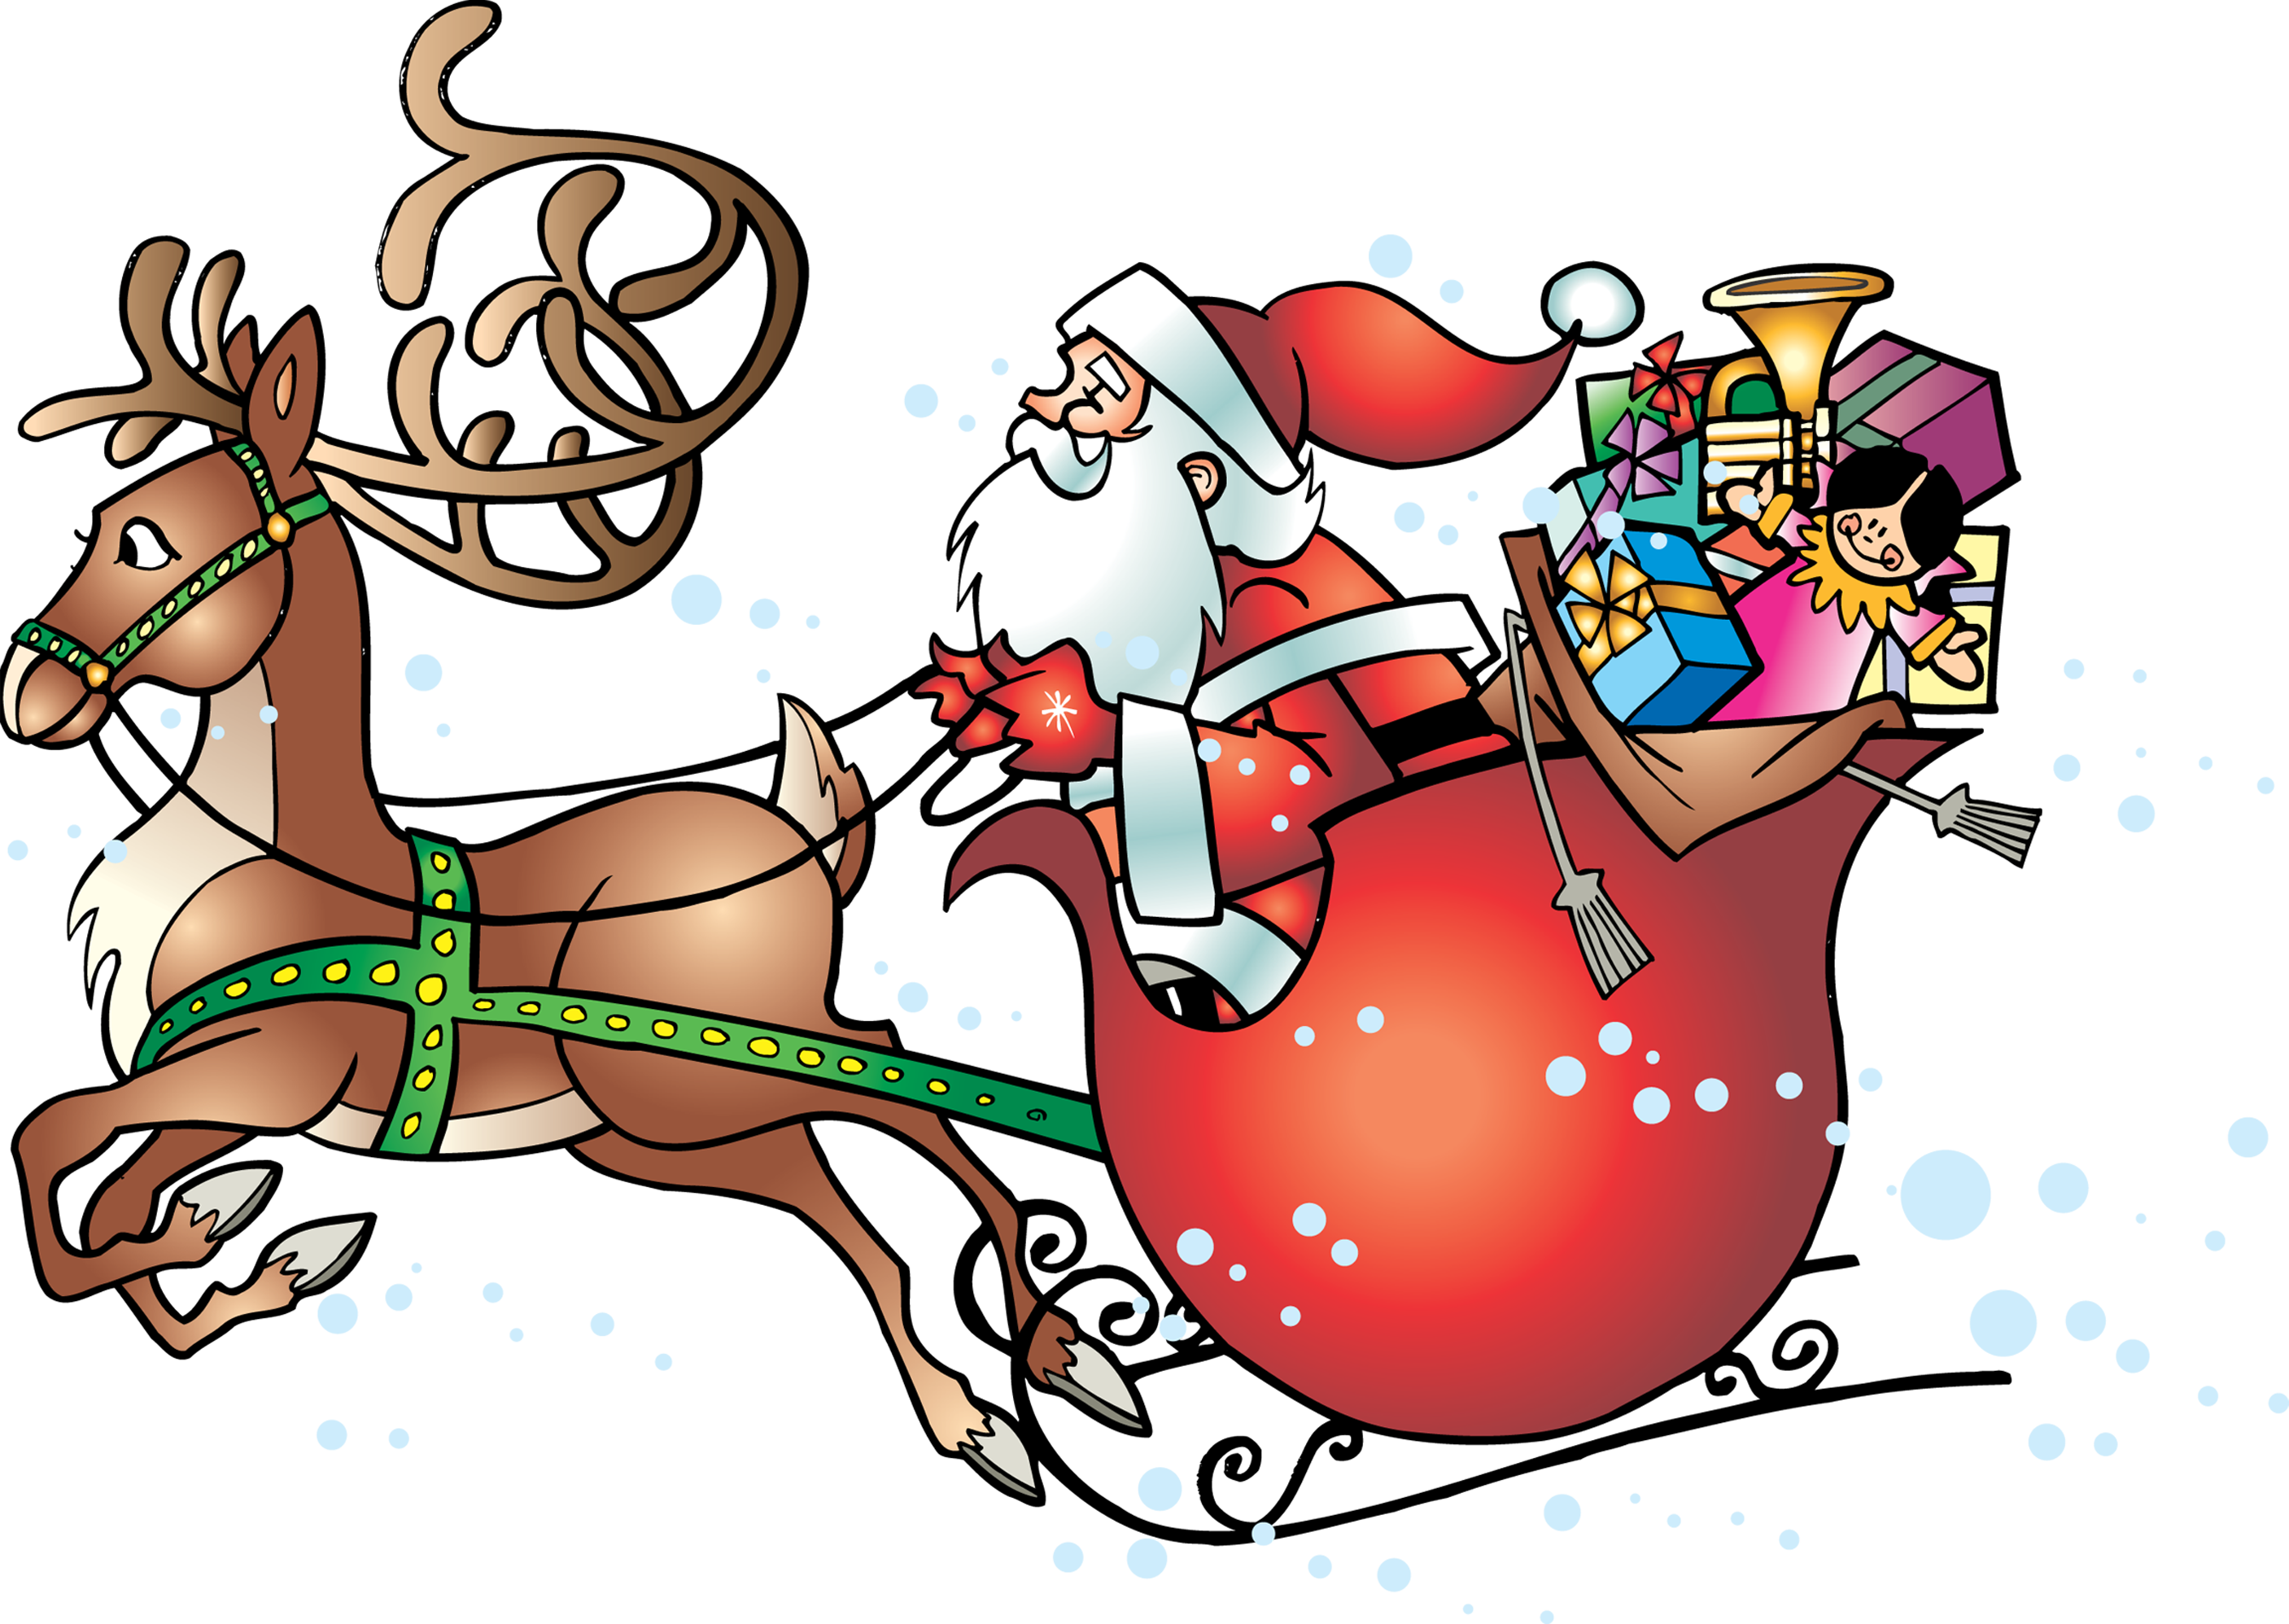 santa sleigh png image collection for download crazypngm crazy png images download #30514